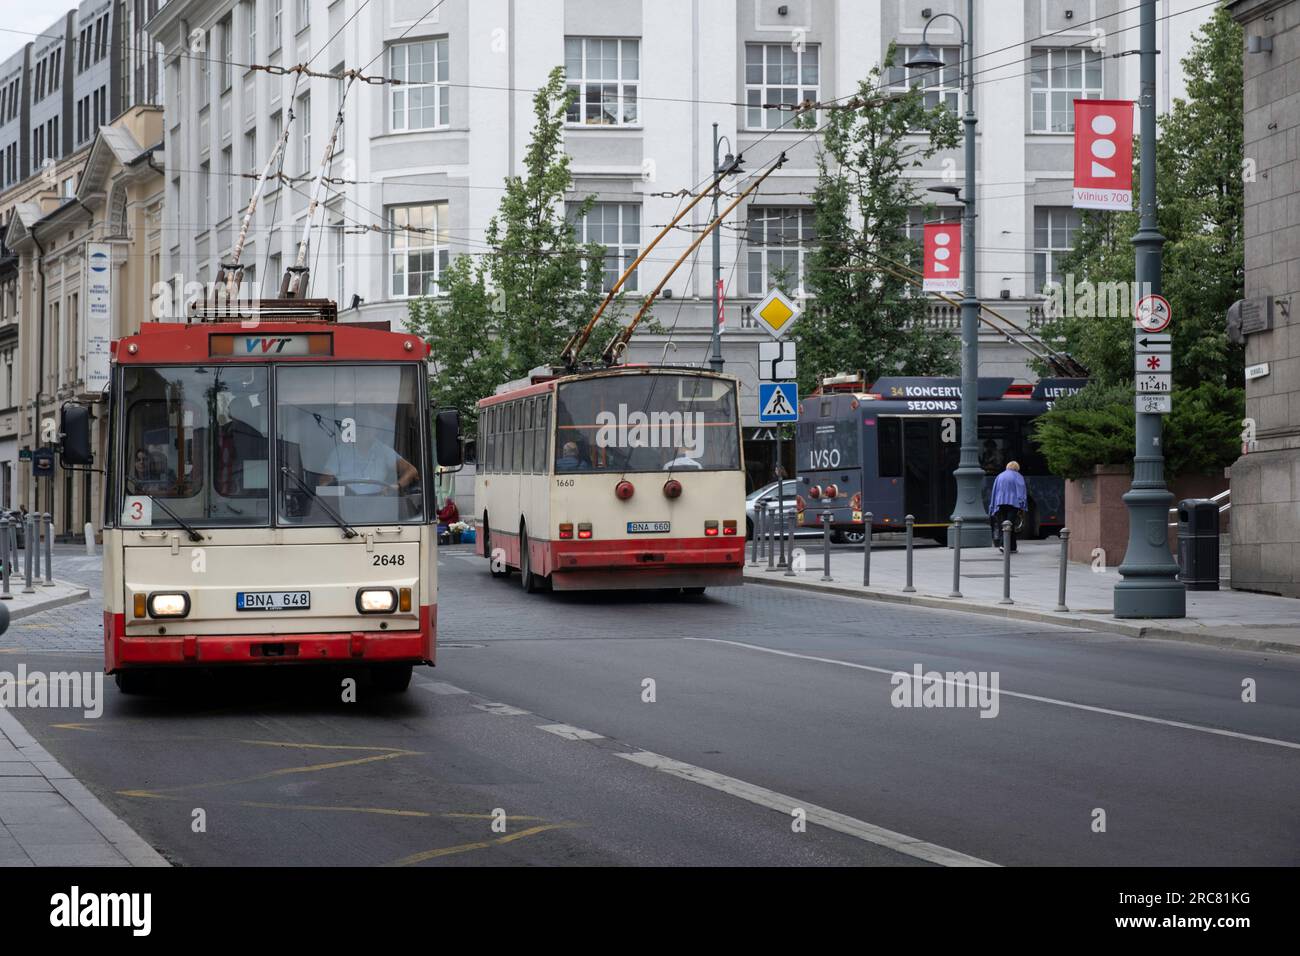 Two old Skoda Trolley Buses pass each other on a street in in the center of Vilnius, Lithuania. Public Transport VVT (Vilniaus viešasis transportas) Stock Photo